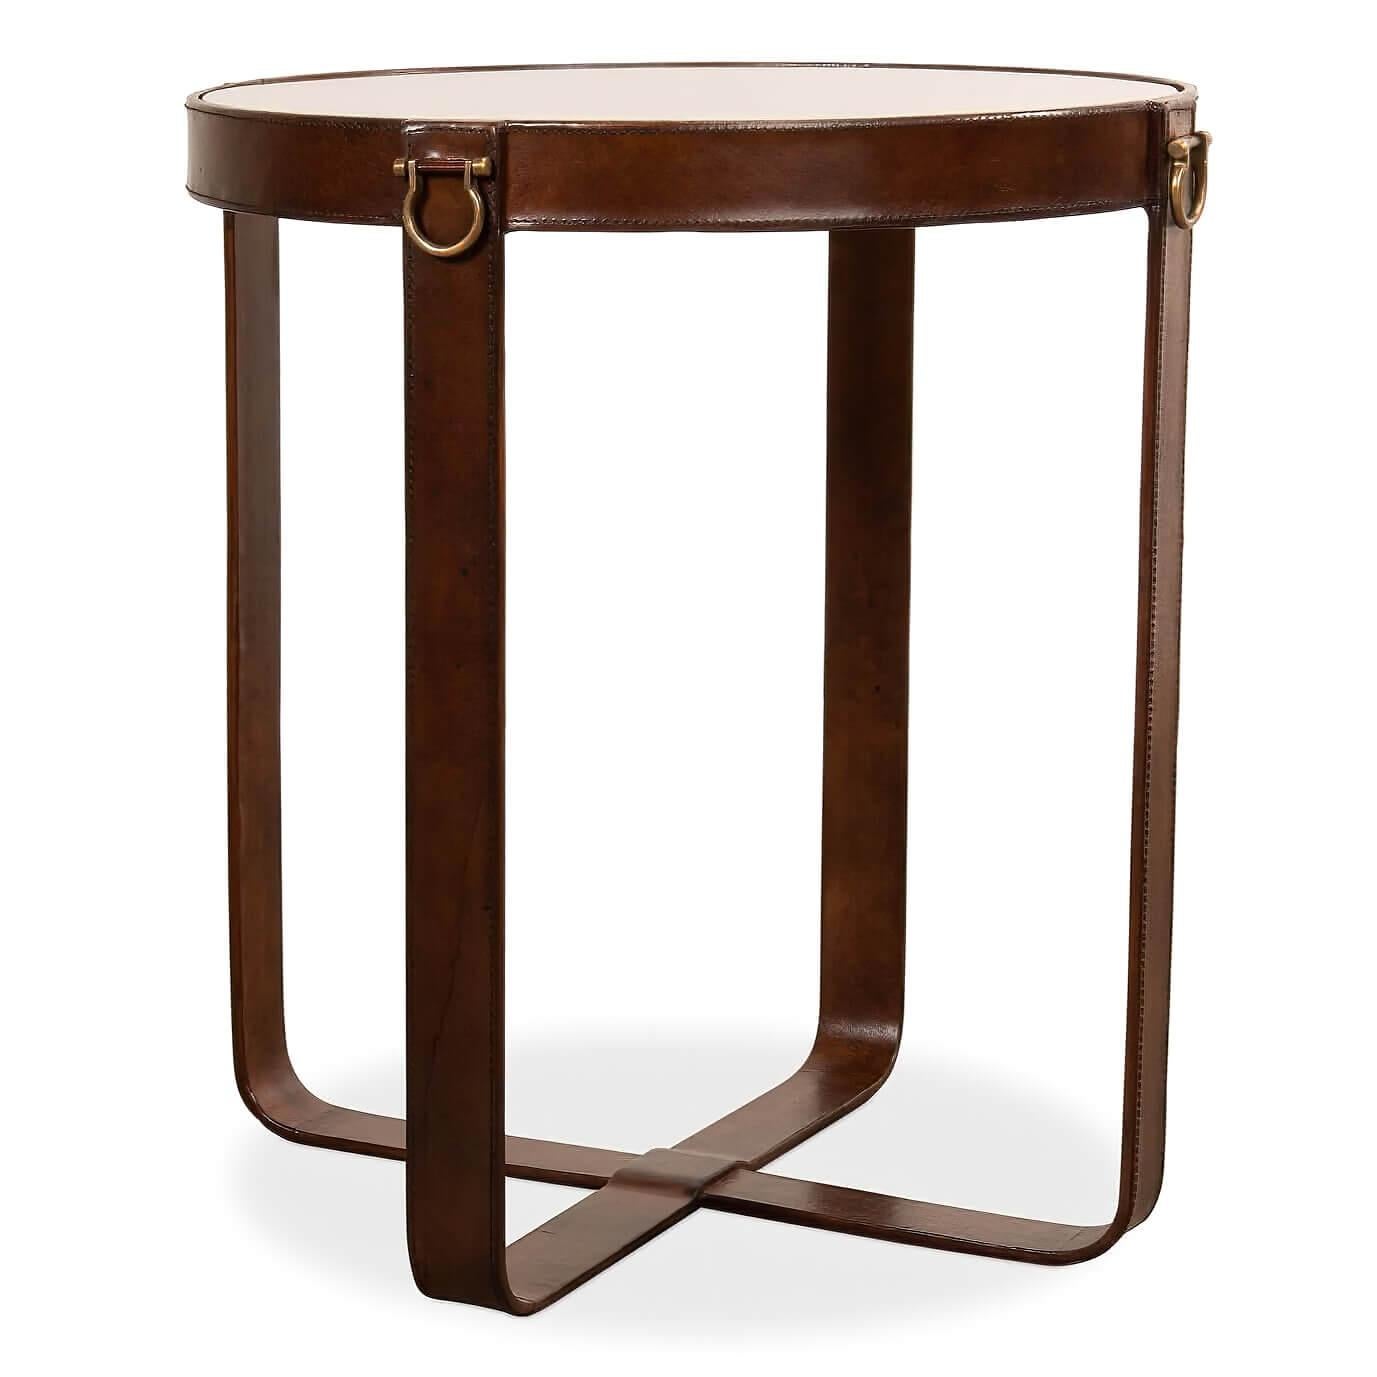 An Industrial round leather and glass end table. This table has an equestrian-inspired design. The top is glass and is supported by four legs wrapped in leather with stitching and brass accents. 

Dimensions: 20